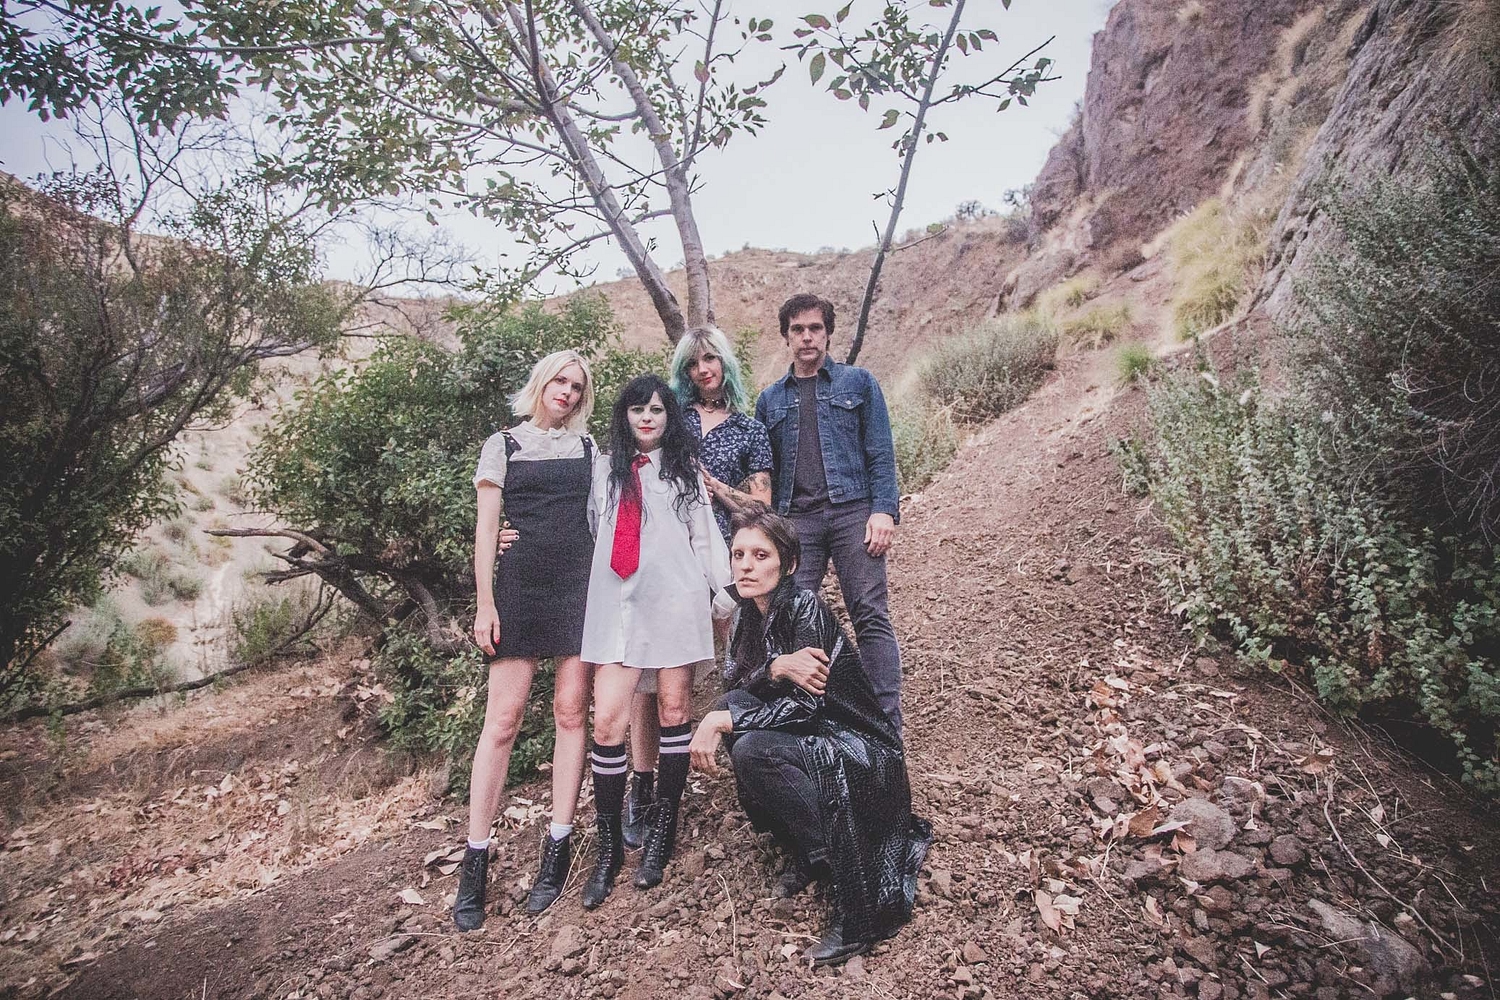 Death Valley Girls tackle mental health issues on darkly danceable new track ‘More Dead’